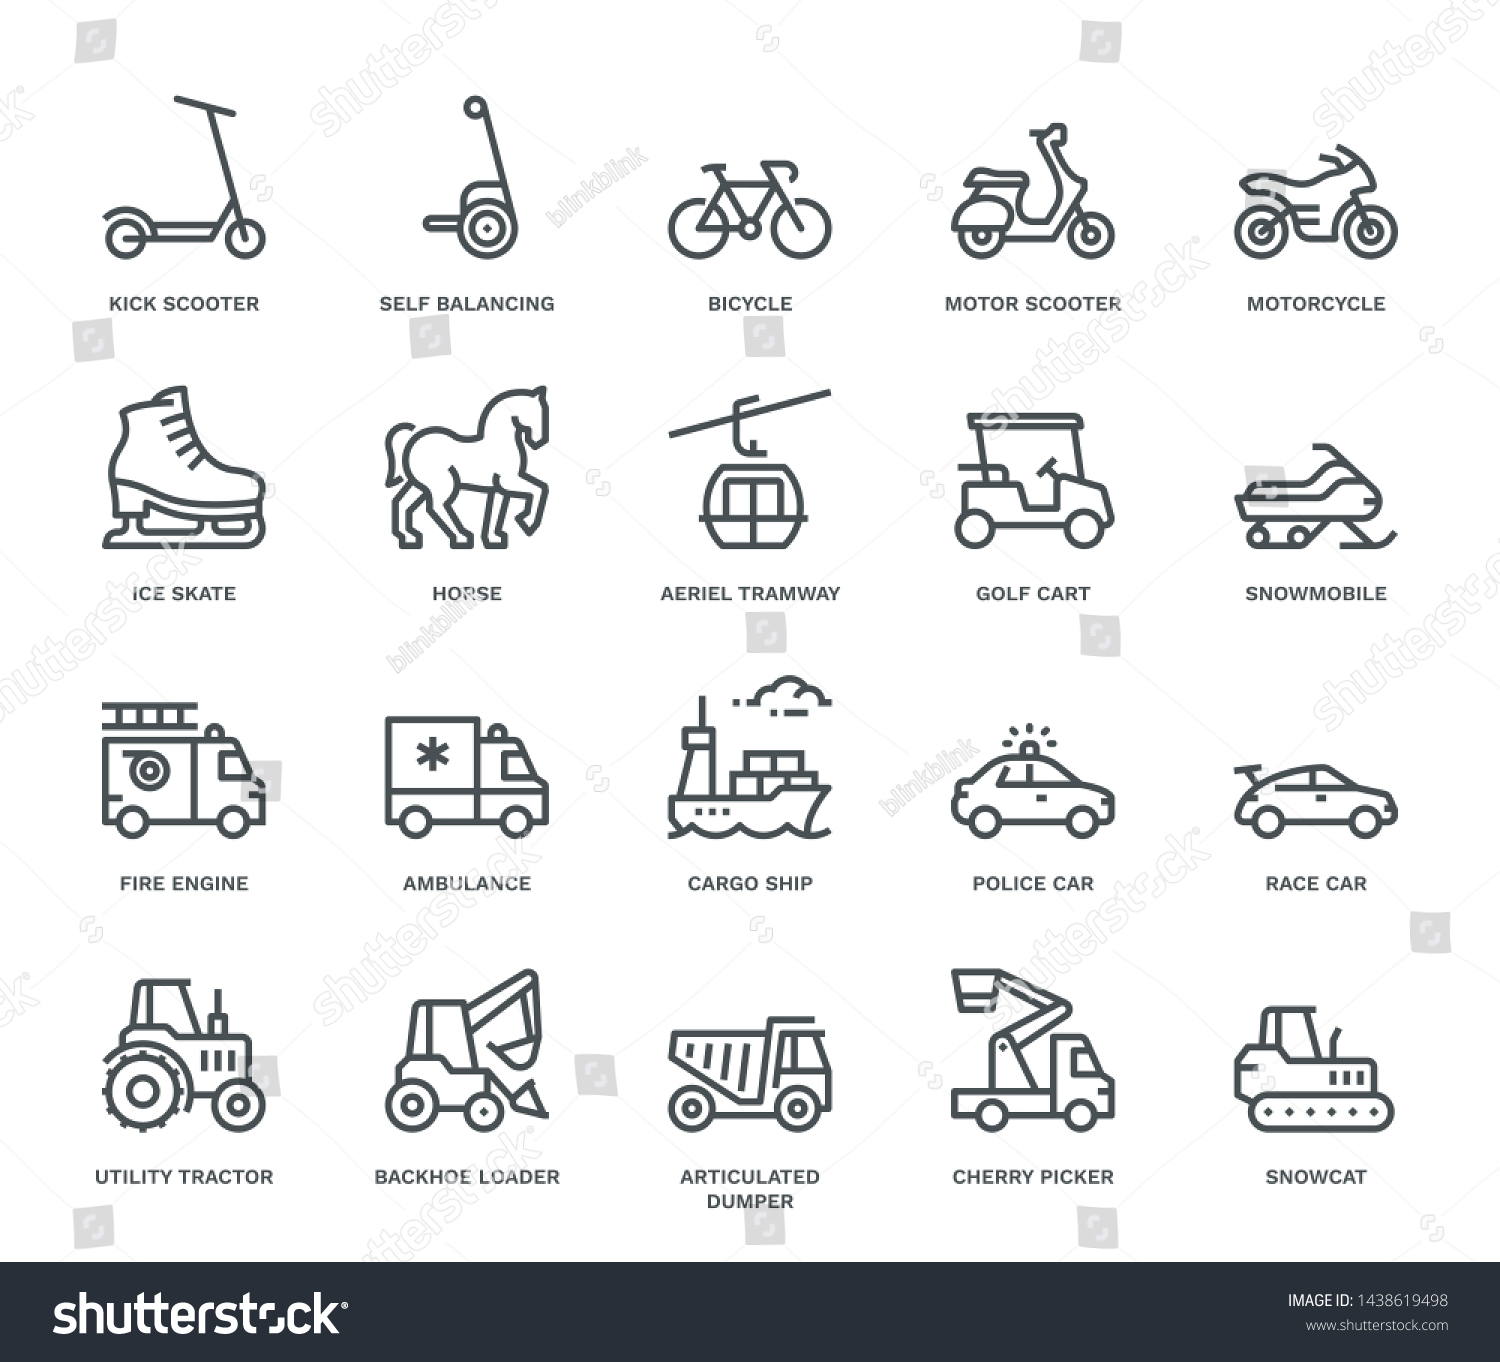 SVG of Transport Icons, side view,  Monoline concept
The icons were created on a 48x48 pixel aligned, perfect grid providing a clean and crisp appearance. Adjustable stroke weight.  svg